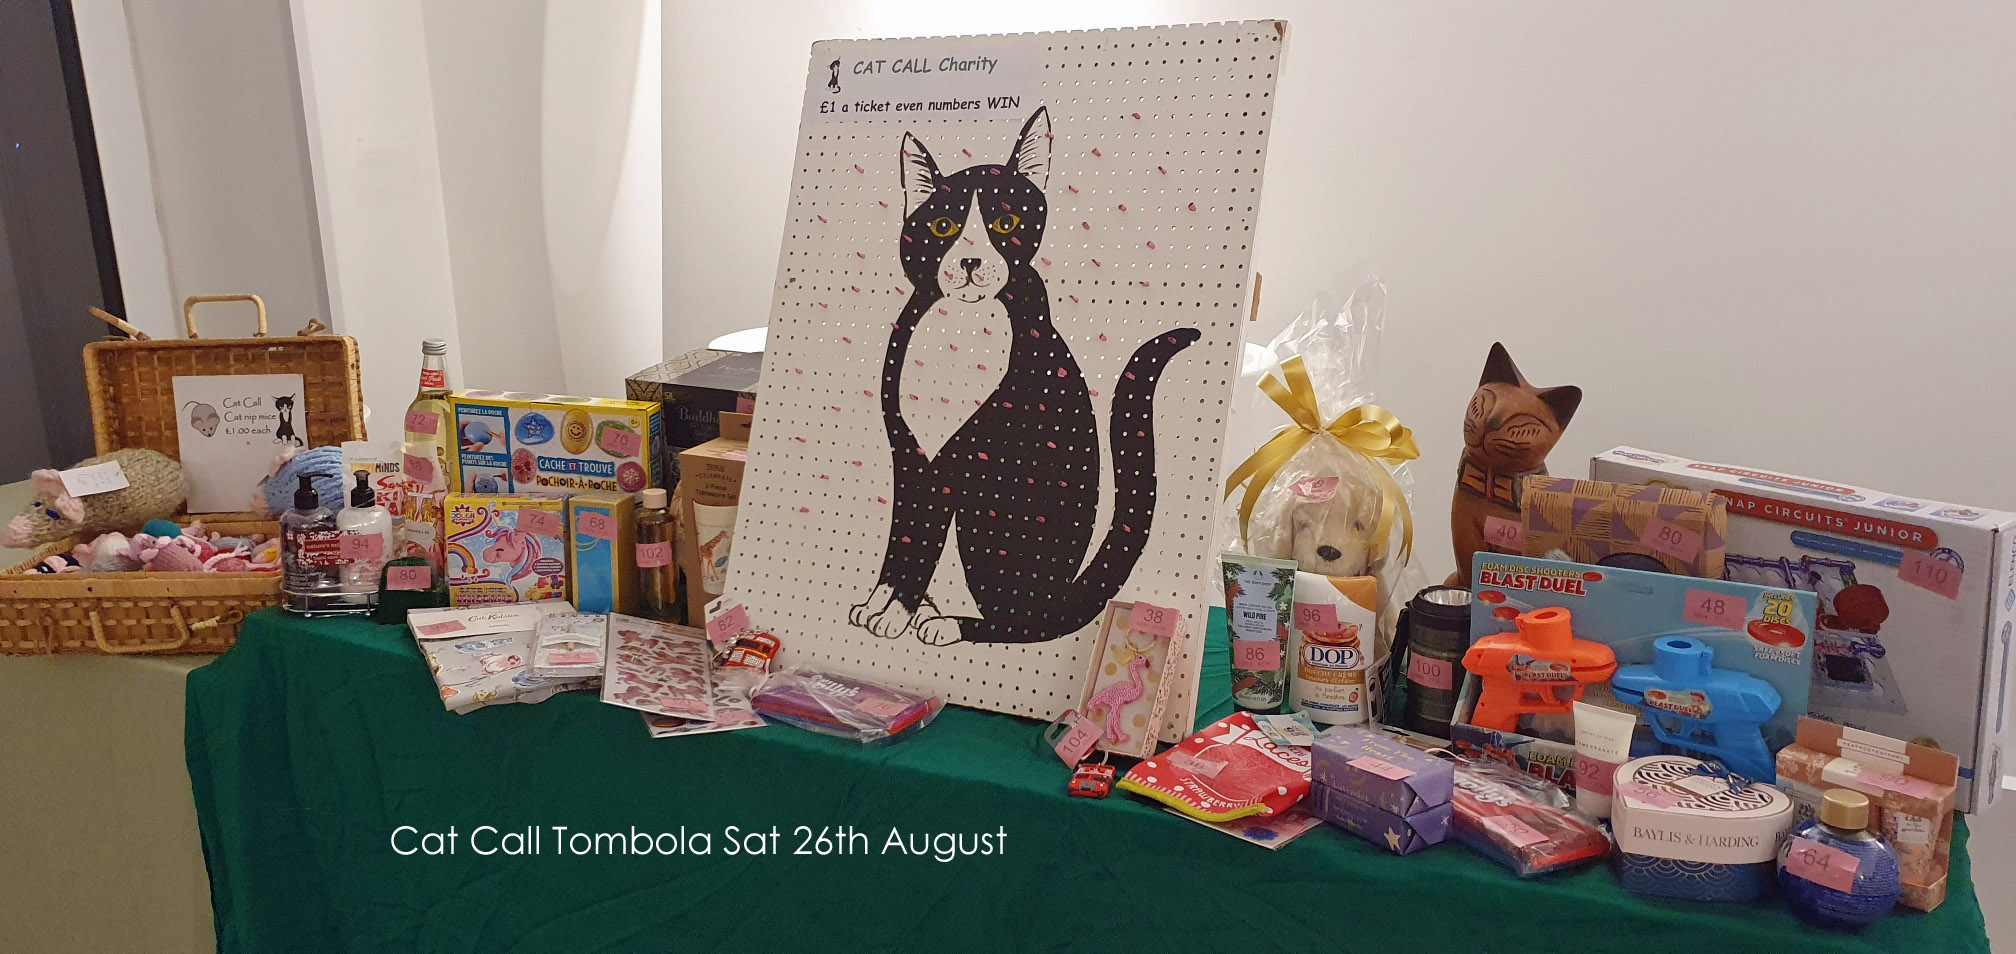 Over 100 prizes in the Cat Call tombola